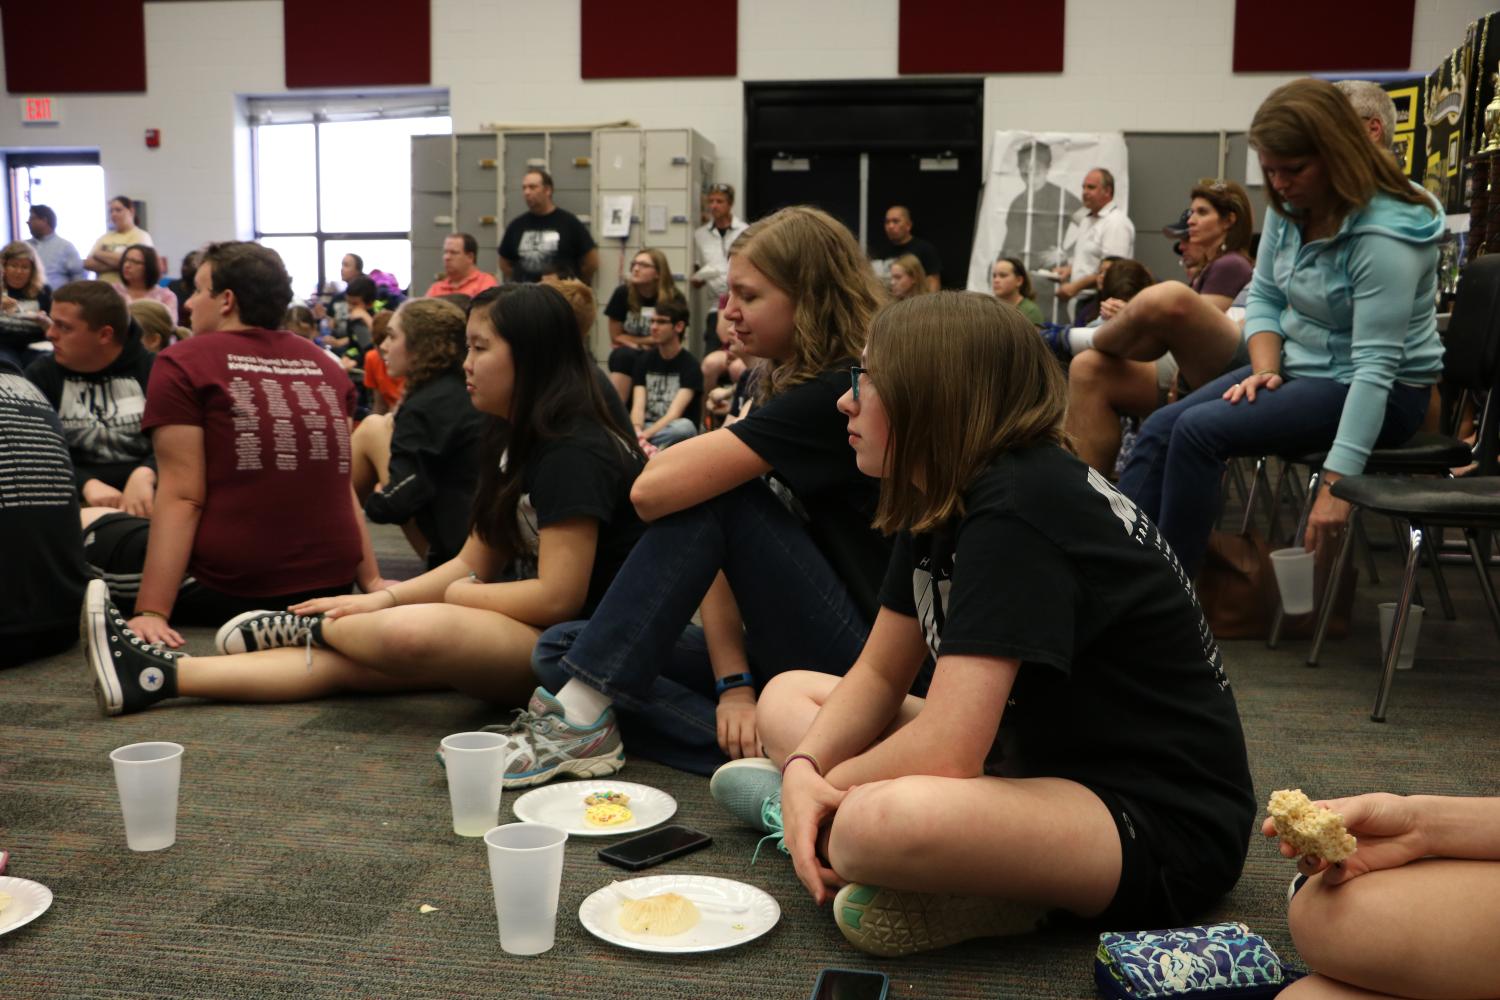 Freshmen Corynn Argent, Emma Temper, and Emilee Statzer listen to Rob Stegeman talk about the new marching band show. A new drum major has been chosen to help lead the band. Freshman Grace Sickendick has stepped up and will be the junior drum major this next season.